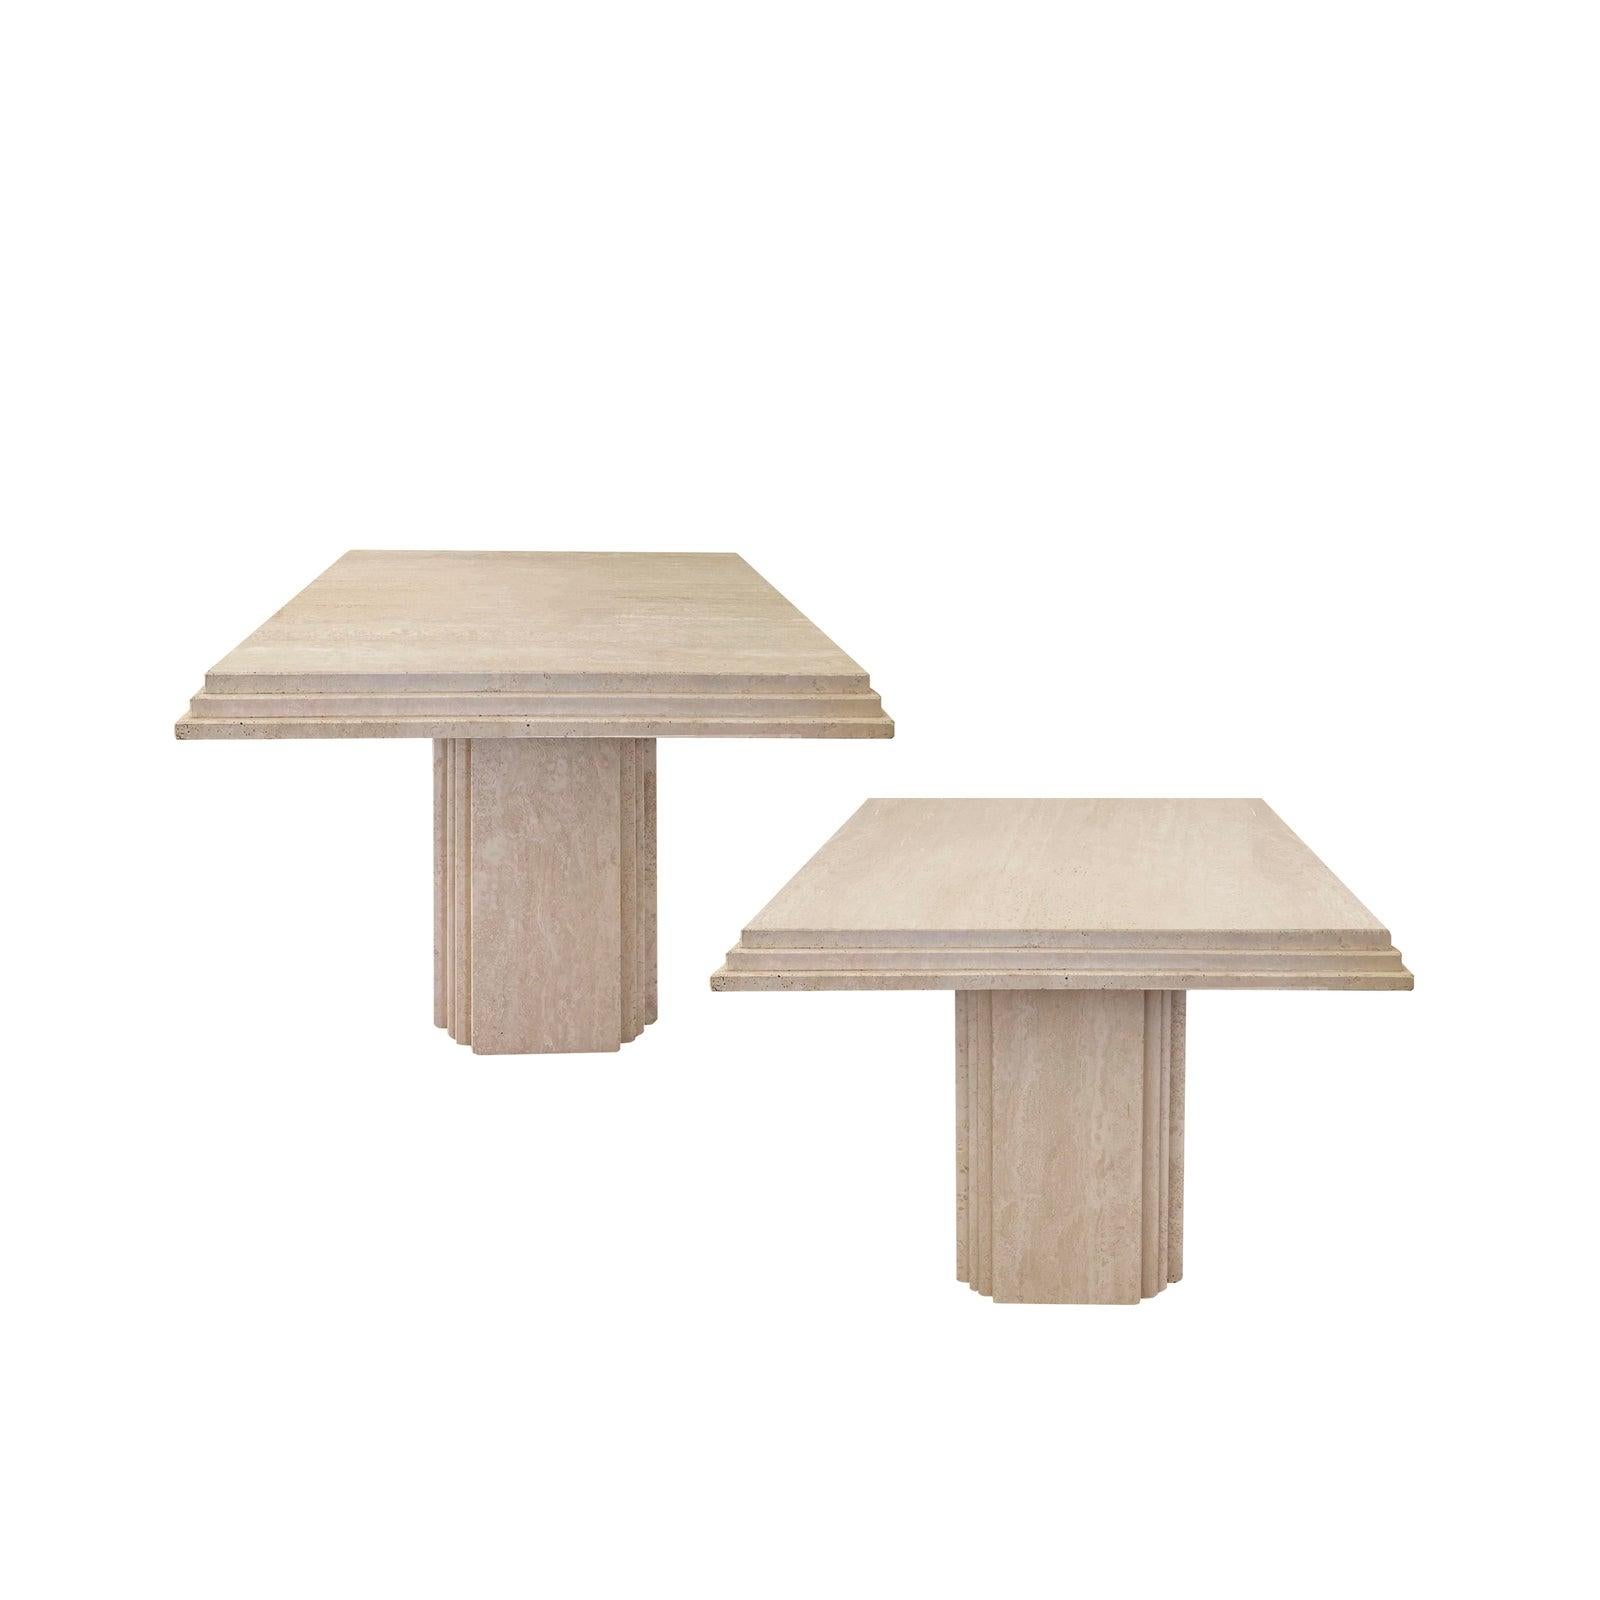 A pair of beautiful 1980s vintage travertine sculptural coffee tables or side tables. Overall in good condition with minor wear and tear for their age. The tables are in honed travertine, not polished. In addition, the tops come off the bases unless